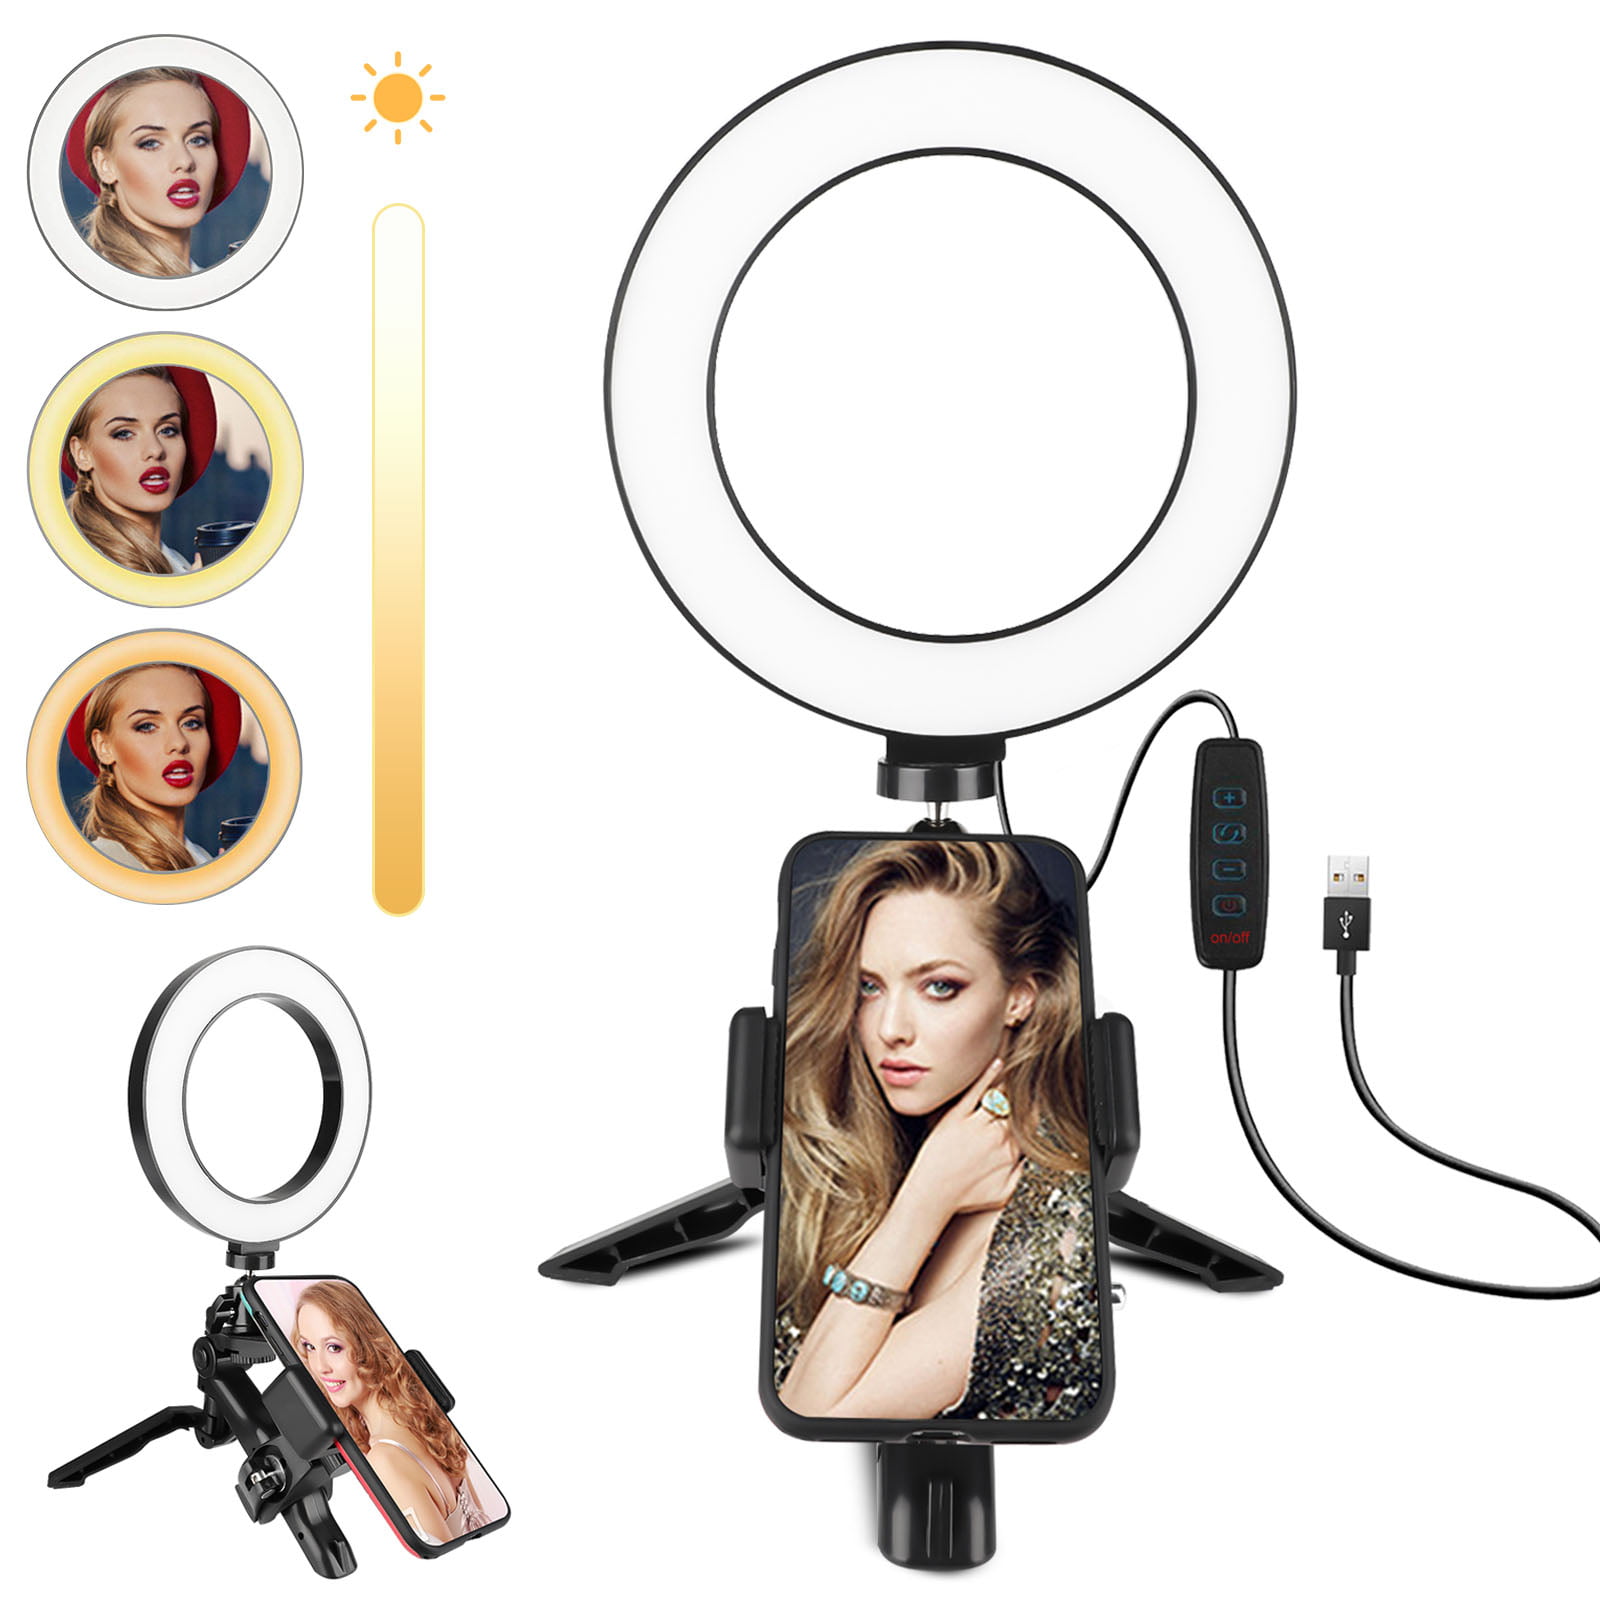 CRAPHY 6 Selfie LED Ring Light with Tripod Stand /& Cell Phone Holder 3 Light Modes 9 Adjustable Brightness Dimmable for YouTube Video//Live Stream//Makeup//Photography